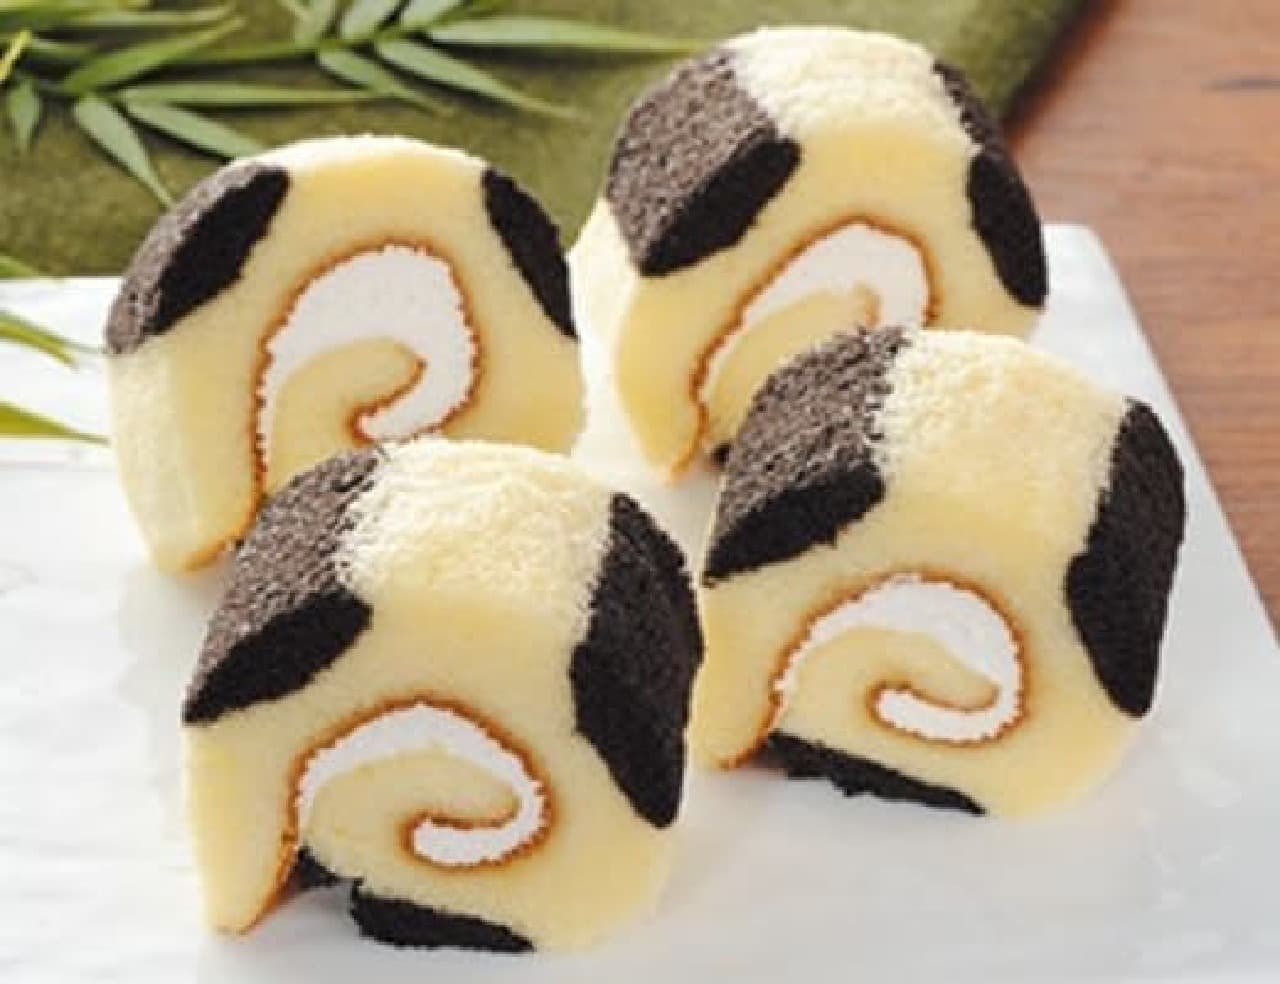 Lawson "Panda with 4 roll cakes of me and me"